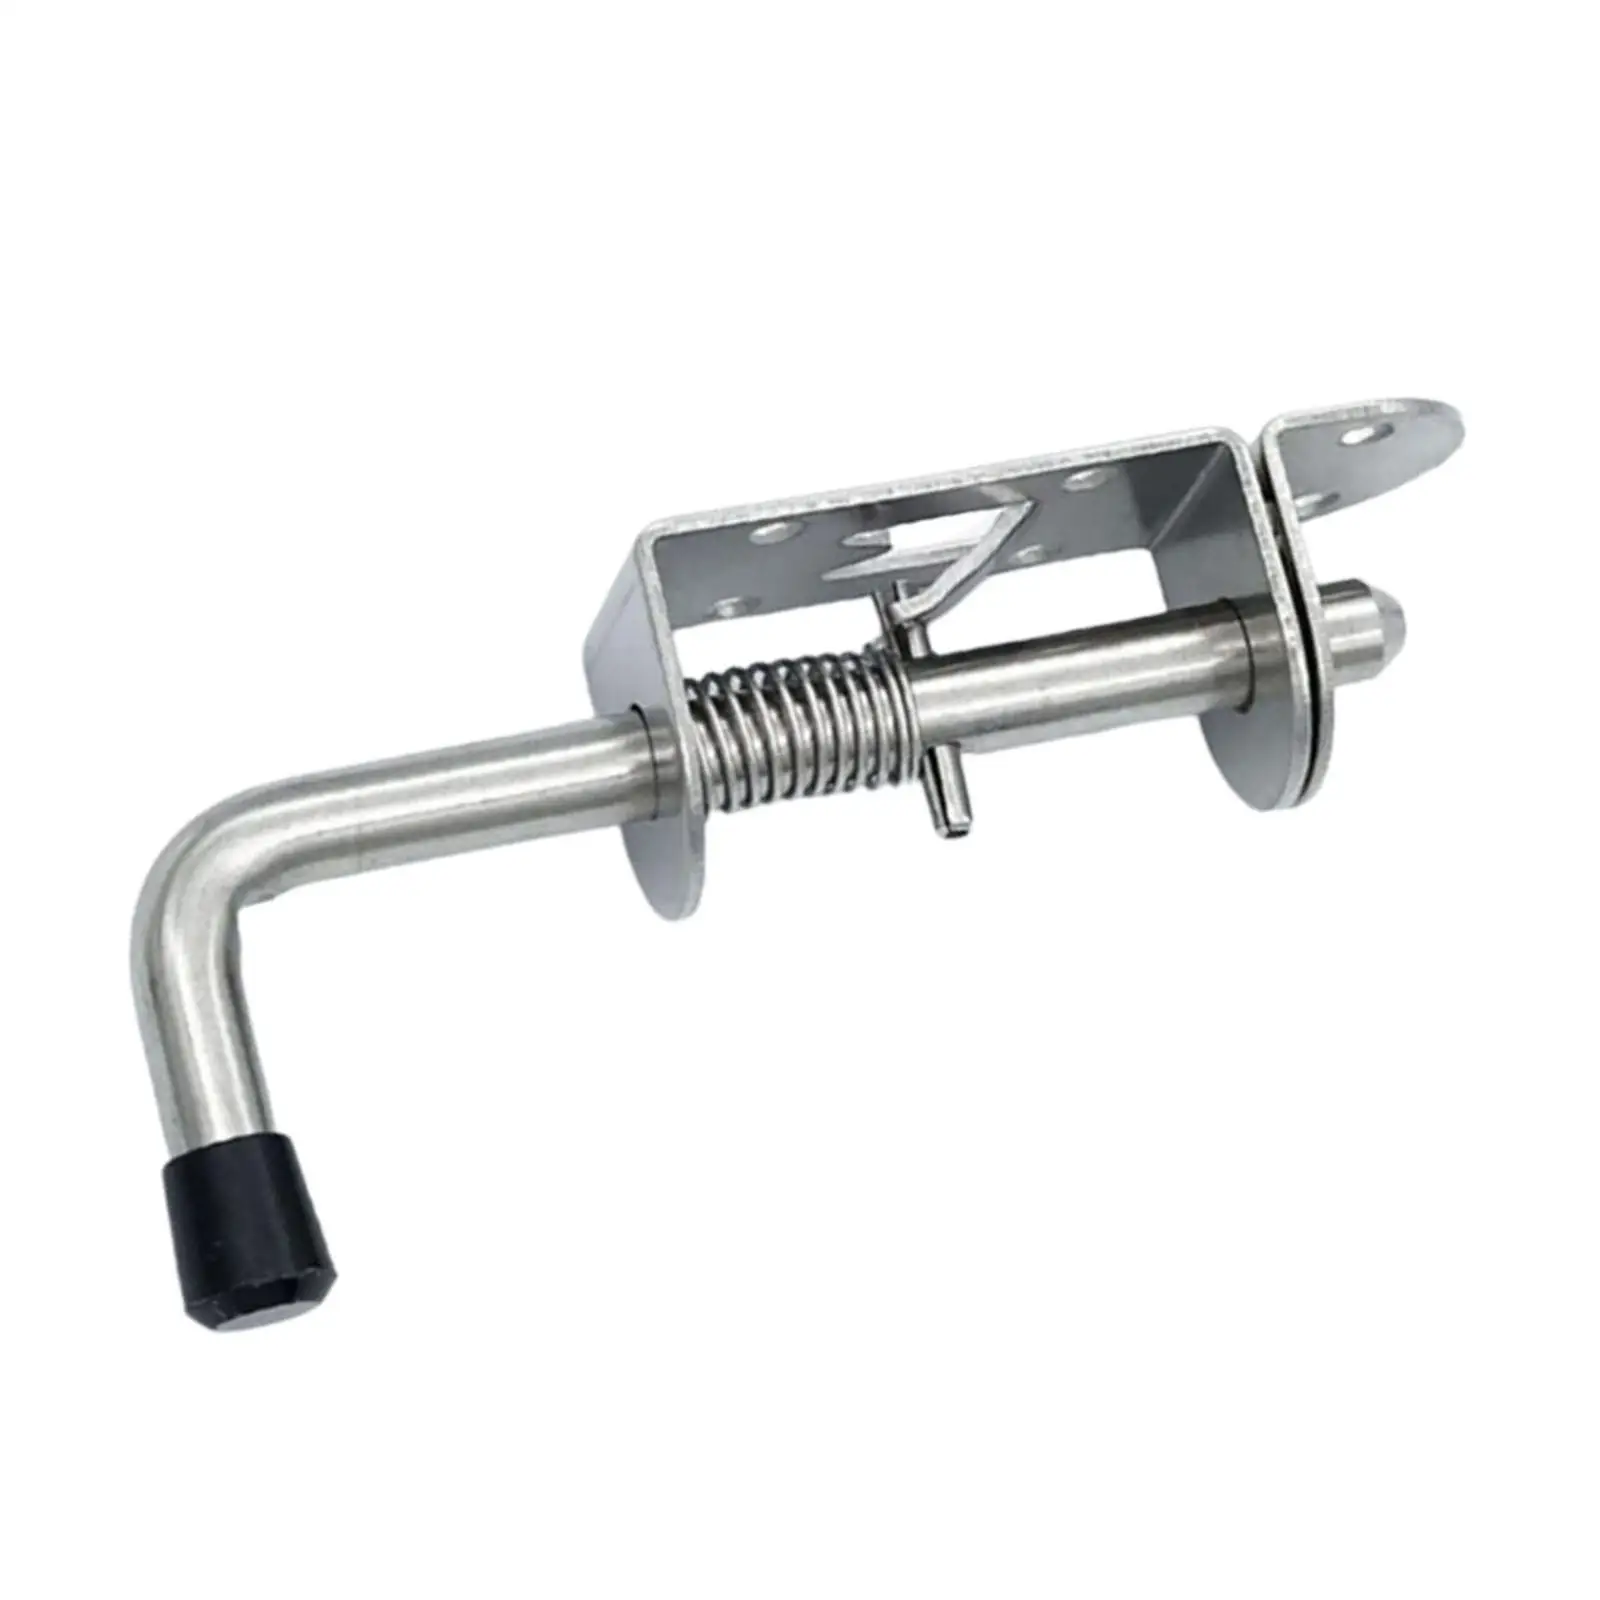 Spring Loaded Barrel Bolt Latch Pin Metal Lock Steel with Grip Sliding Latch Bolt for Chest Shed Utility Trailer Gate